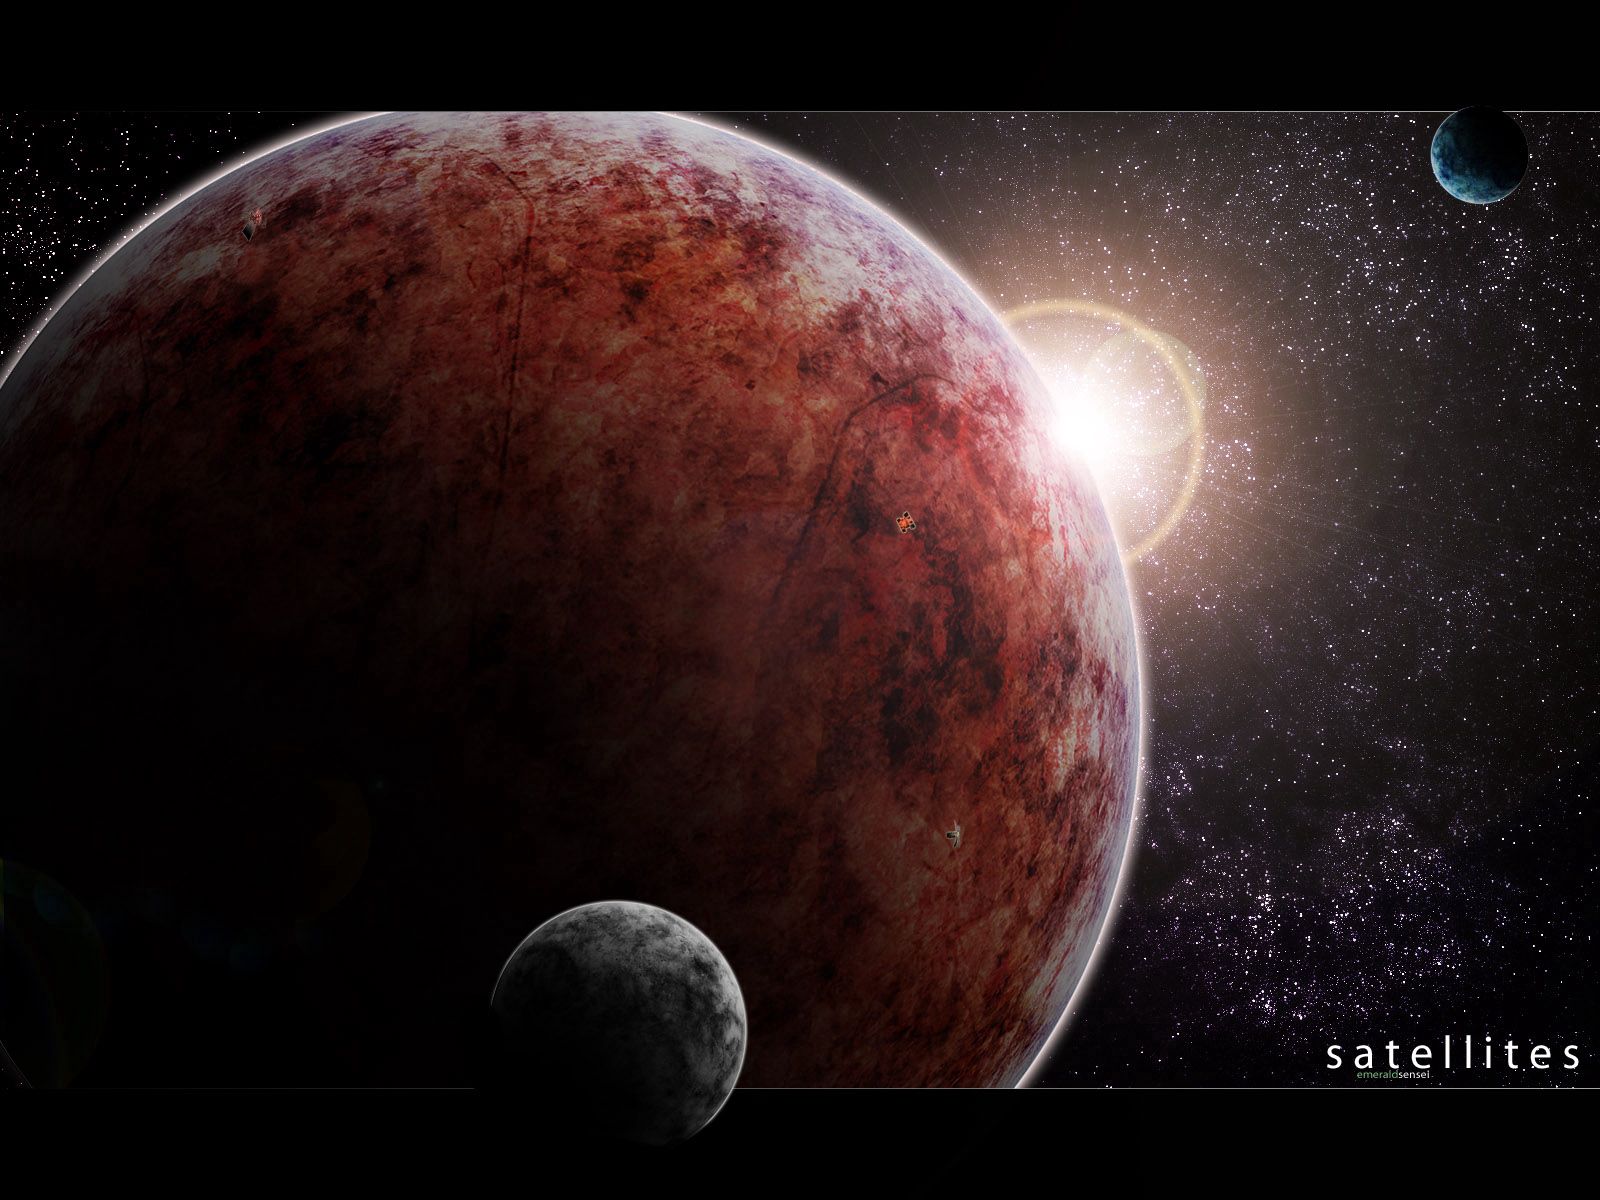 Cool Wallpapers stars, planets, universe, mars, satellites